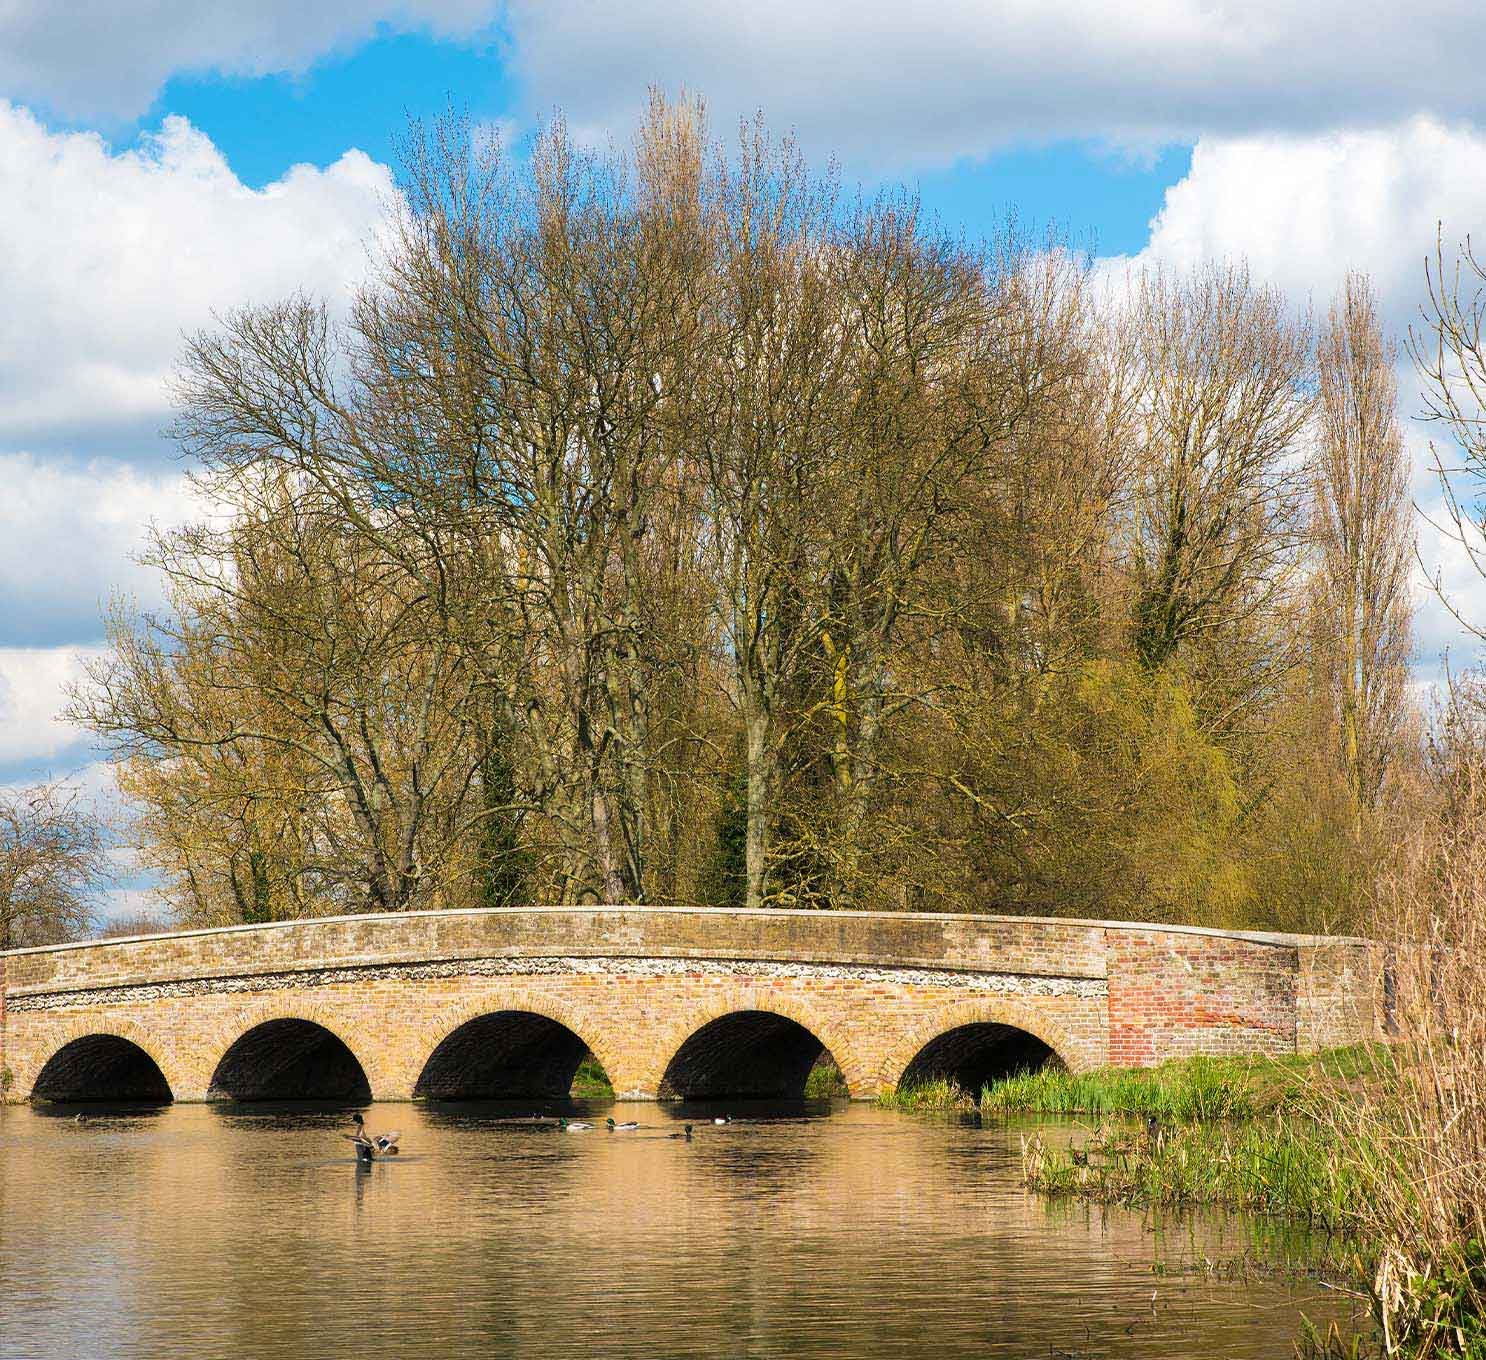 Five Arches Bridge over the river Cray in Sidcup